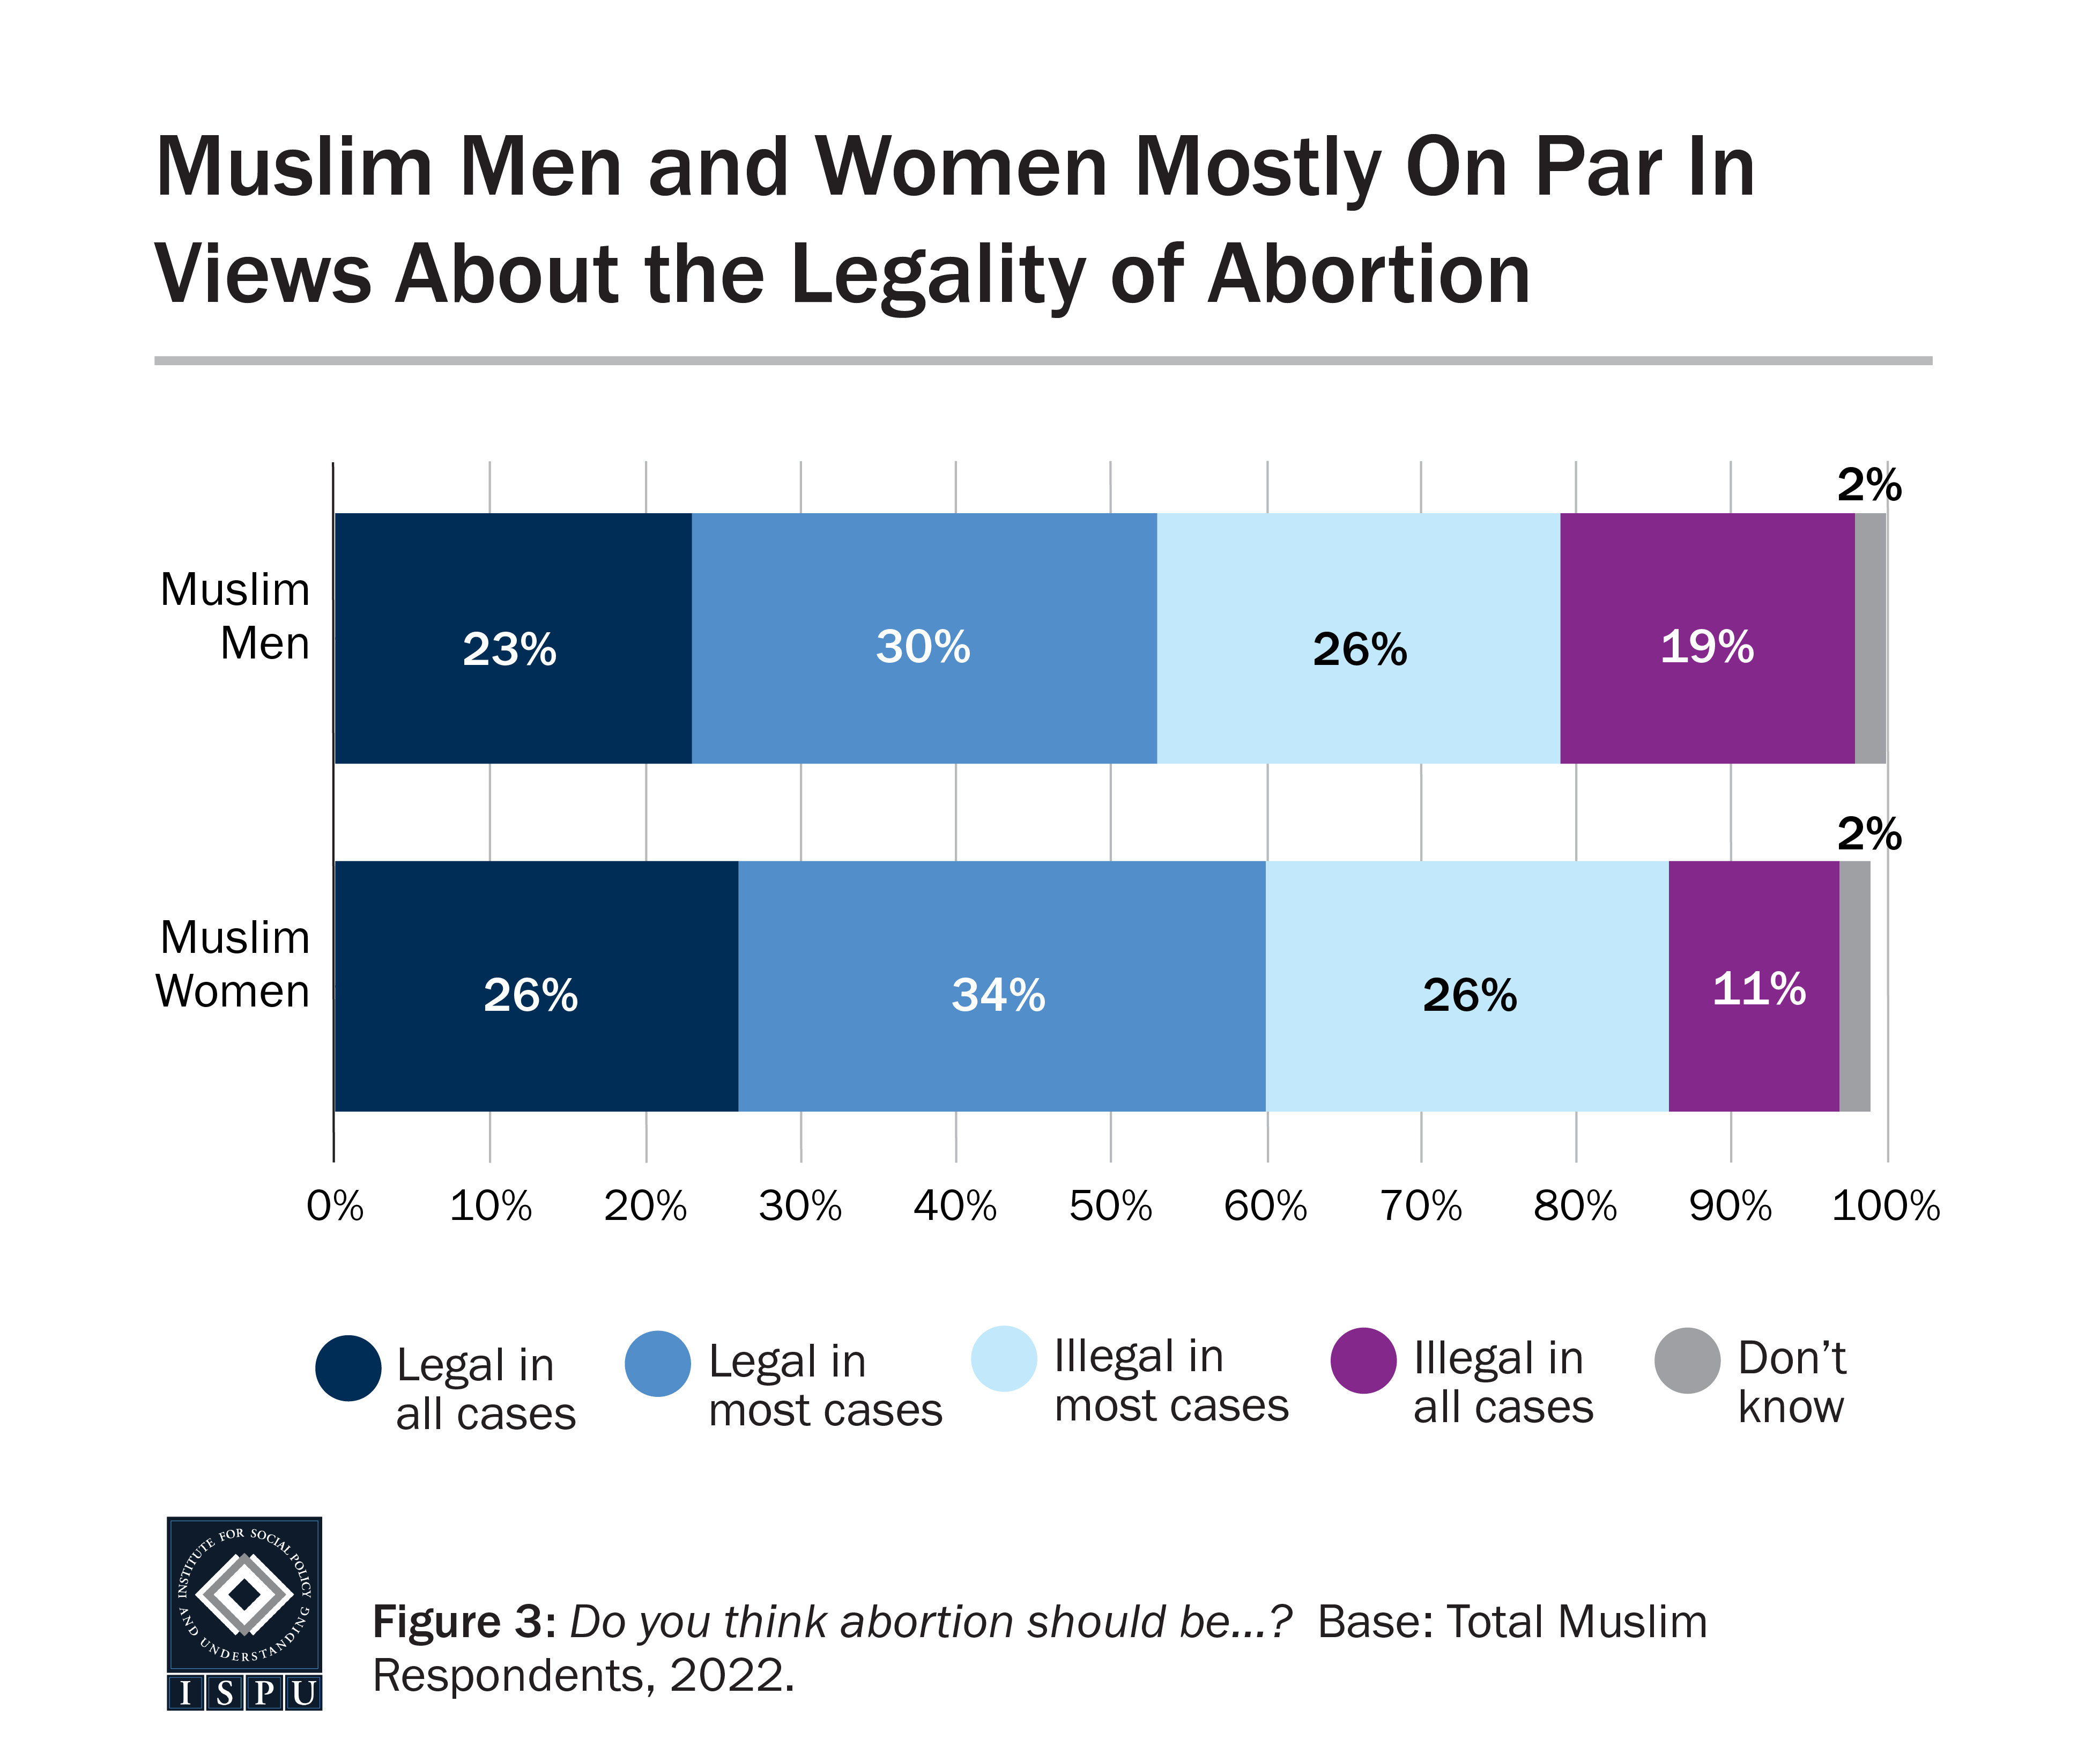 Graph displaying: Muslim men and women about equal in views on abortion legality, with around one third believing abortion should be legal in most cases.